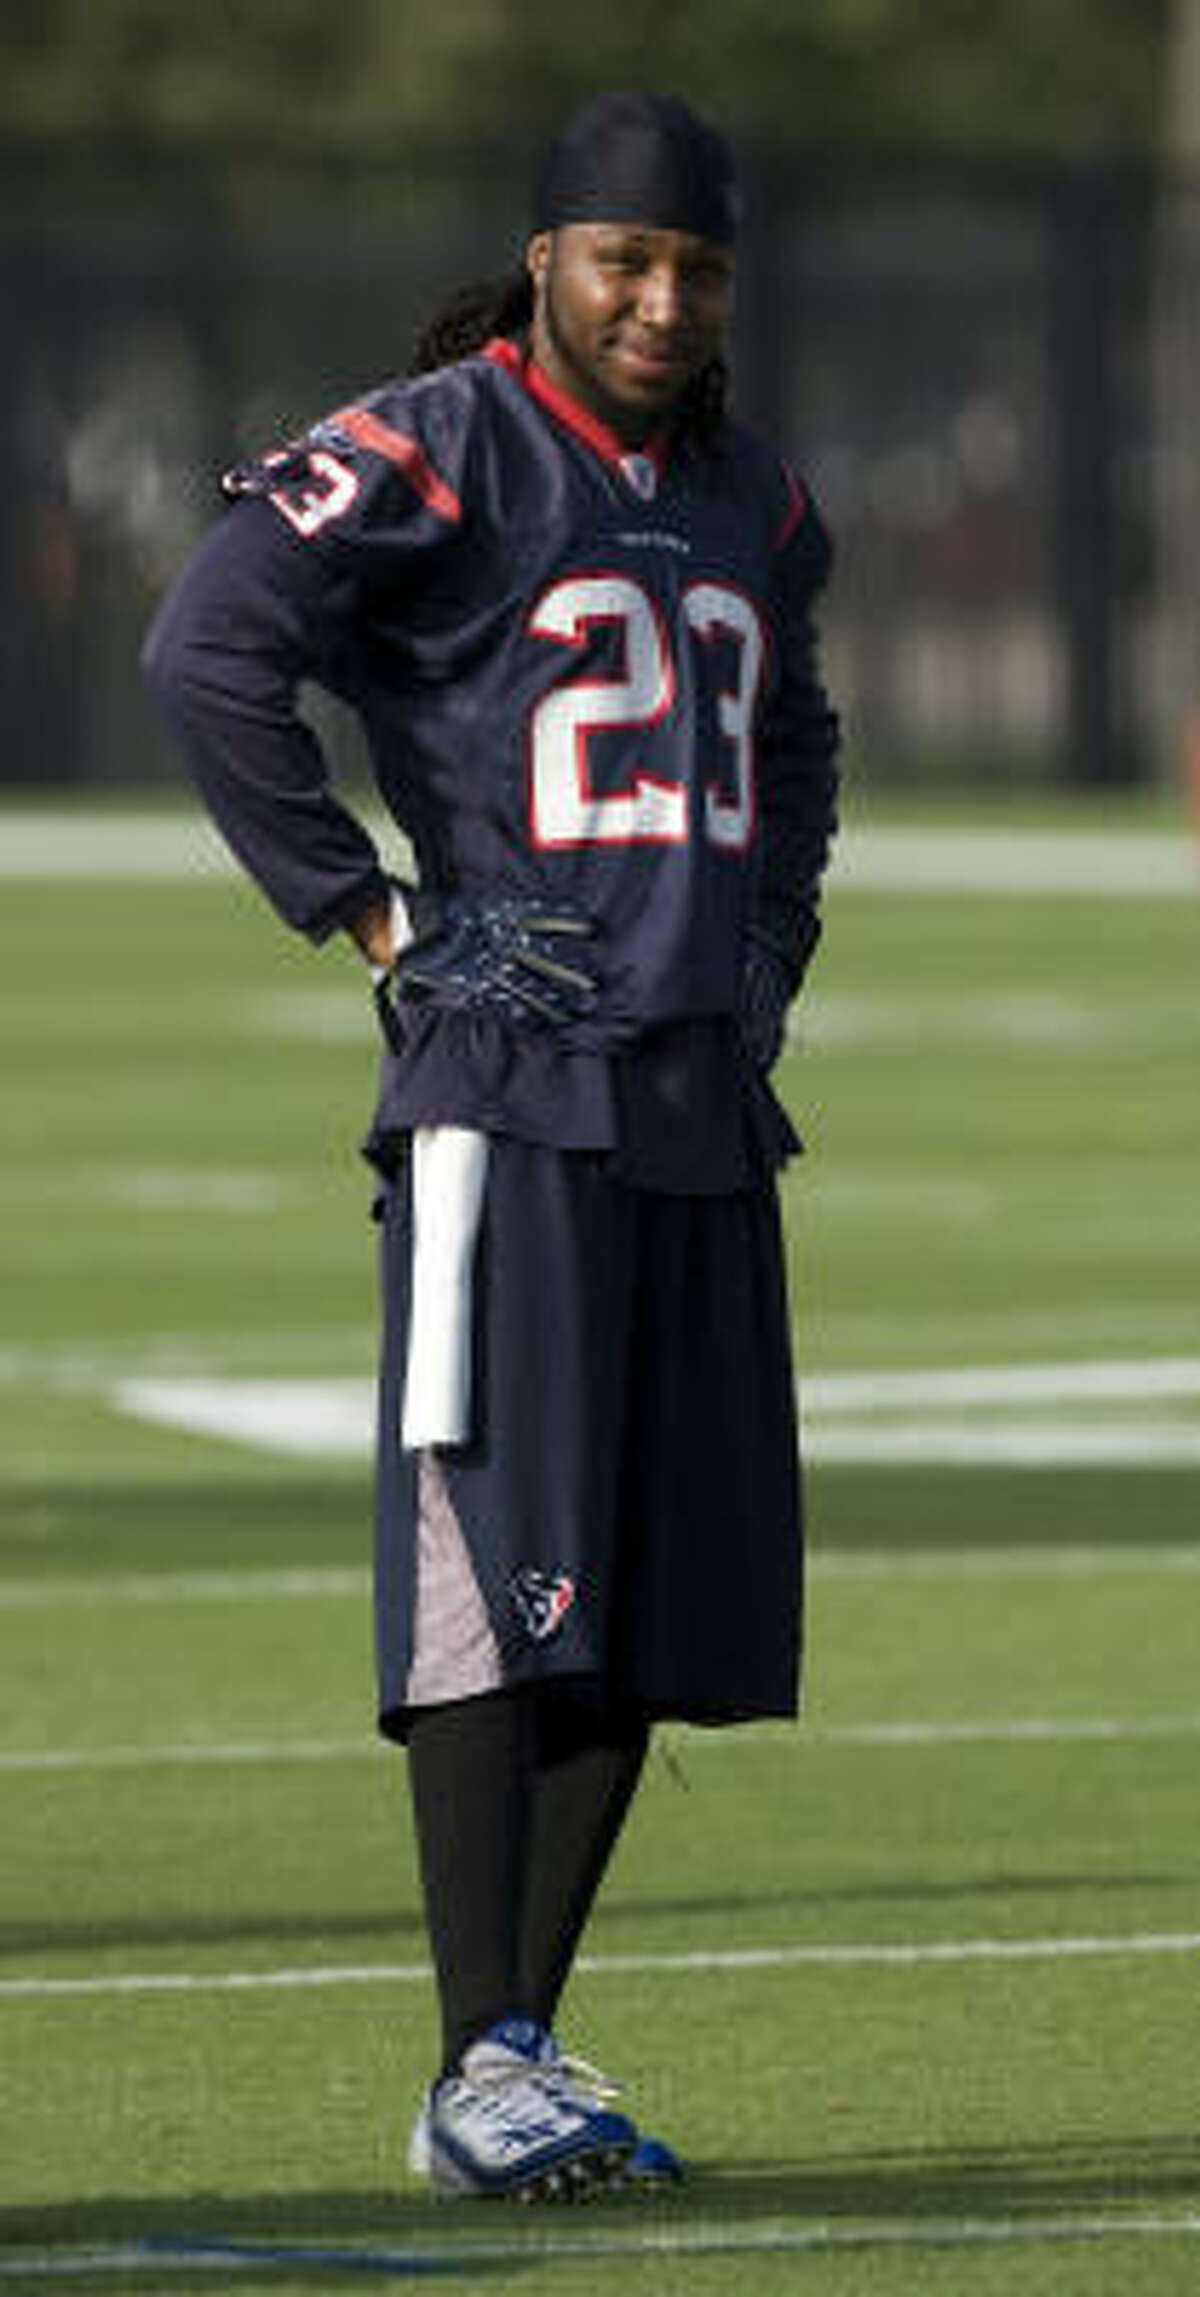 Robinson should return to play for the Texans this season.